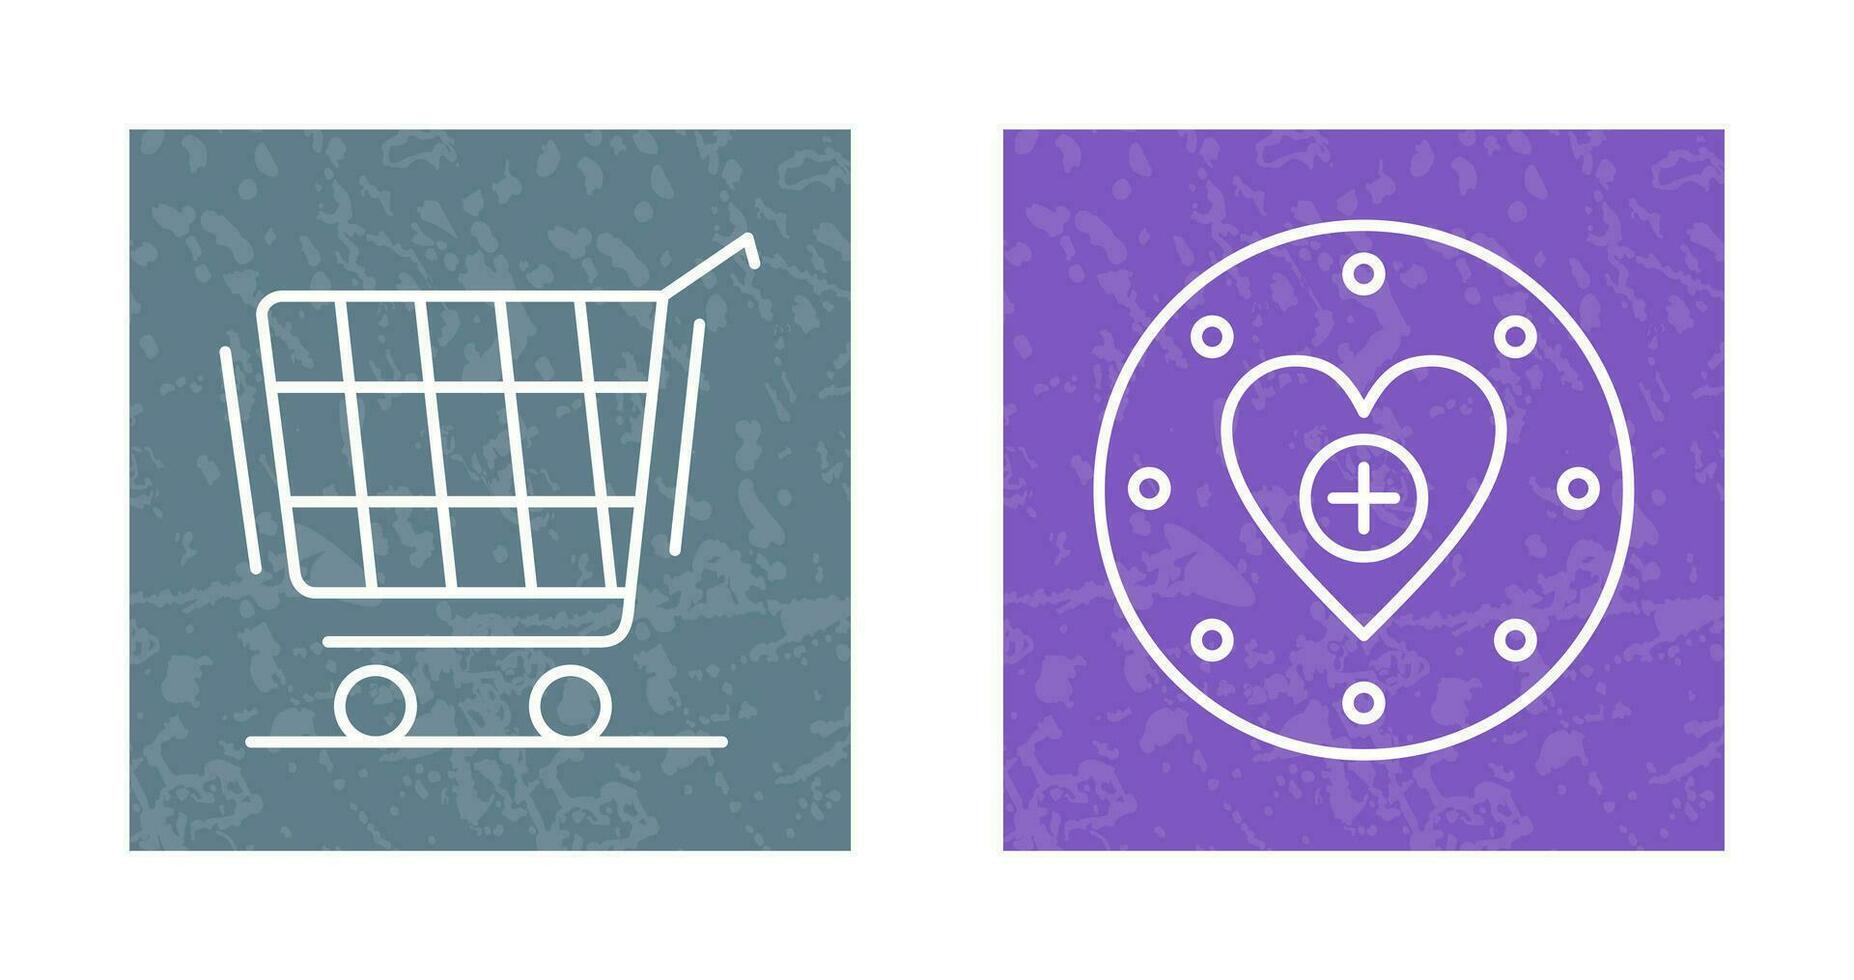 Shopping Cart and Wishlist Icon vector